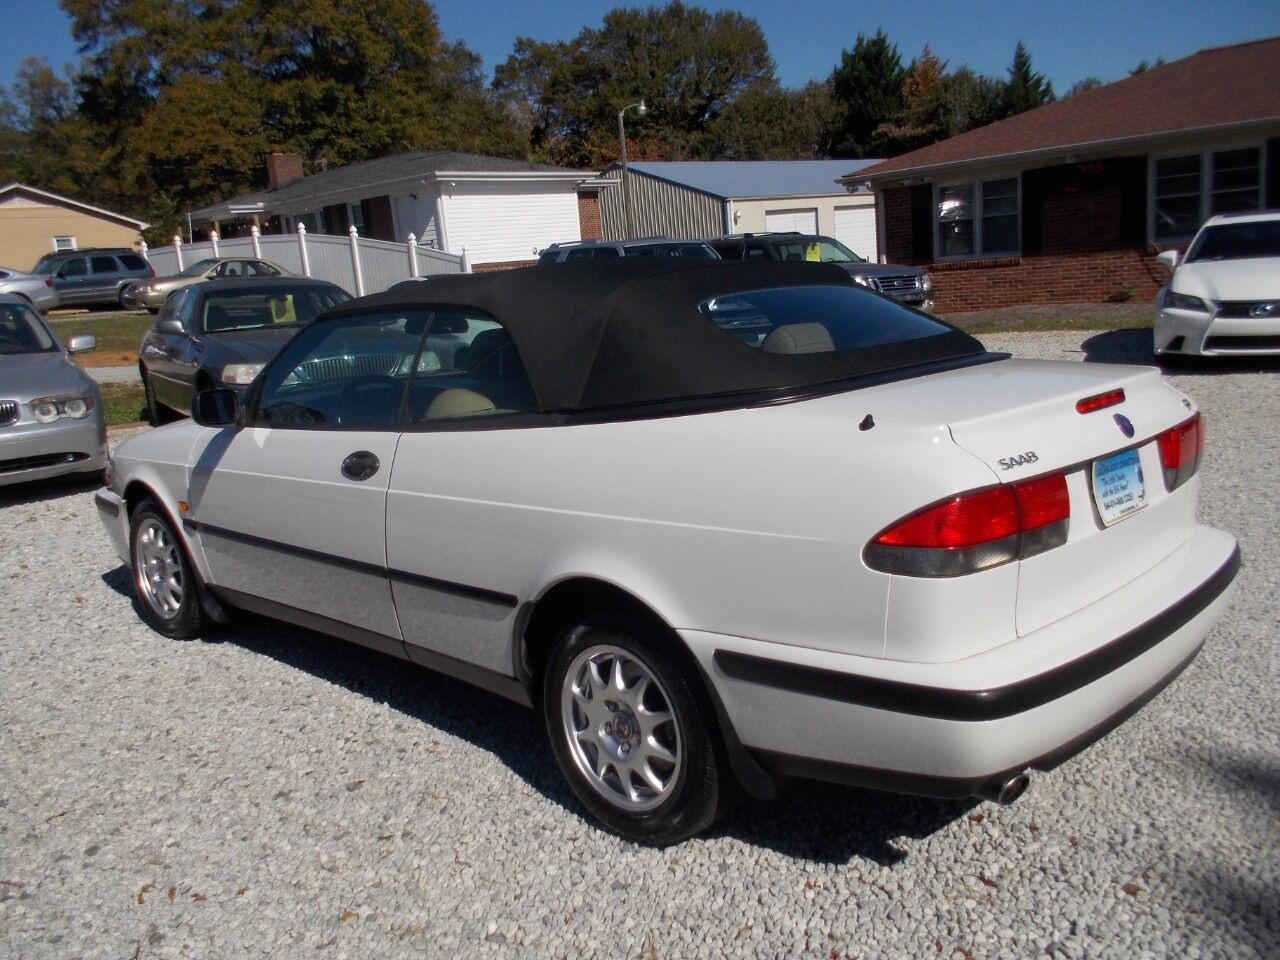 Preowned 2000 SAAB 9-3 Base 2dr Turbo Convertible for sale by Carolina Auto Connection in Spartanburg, SC